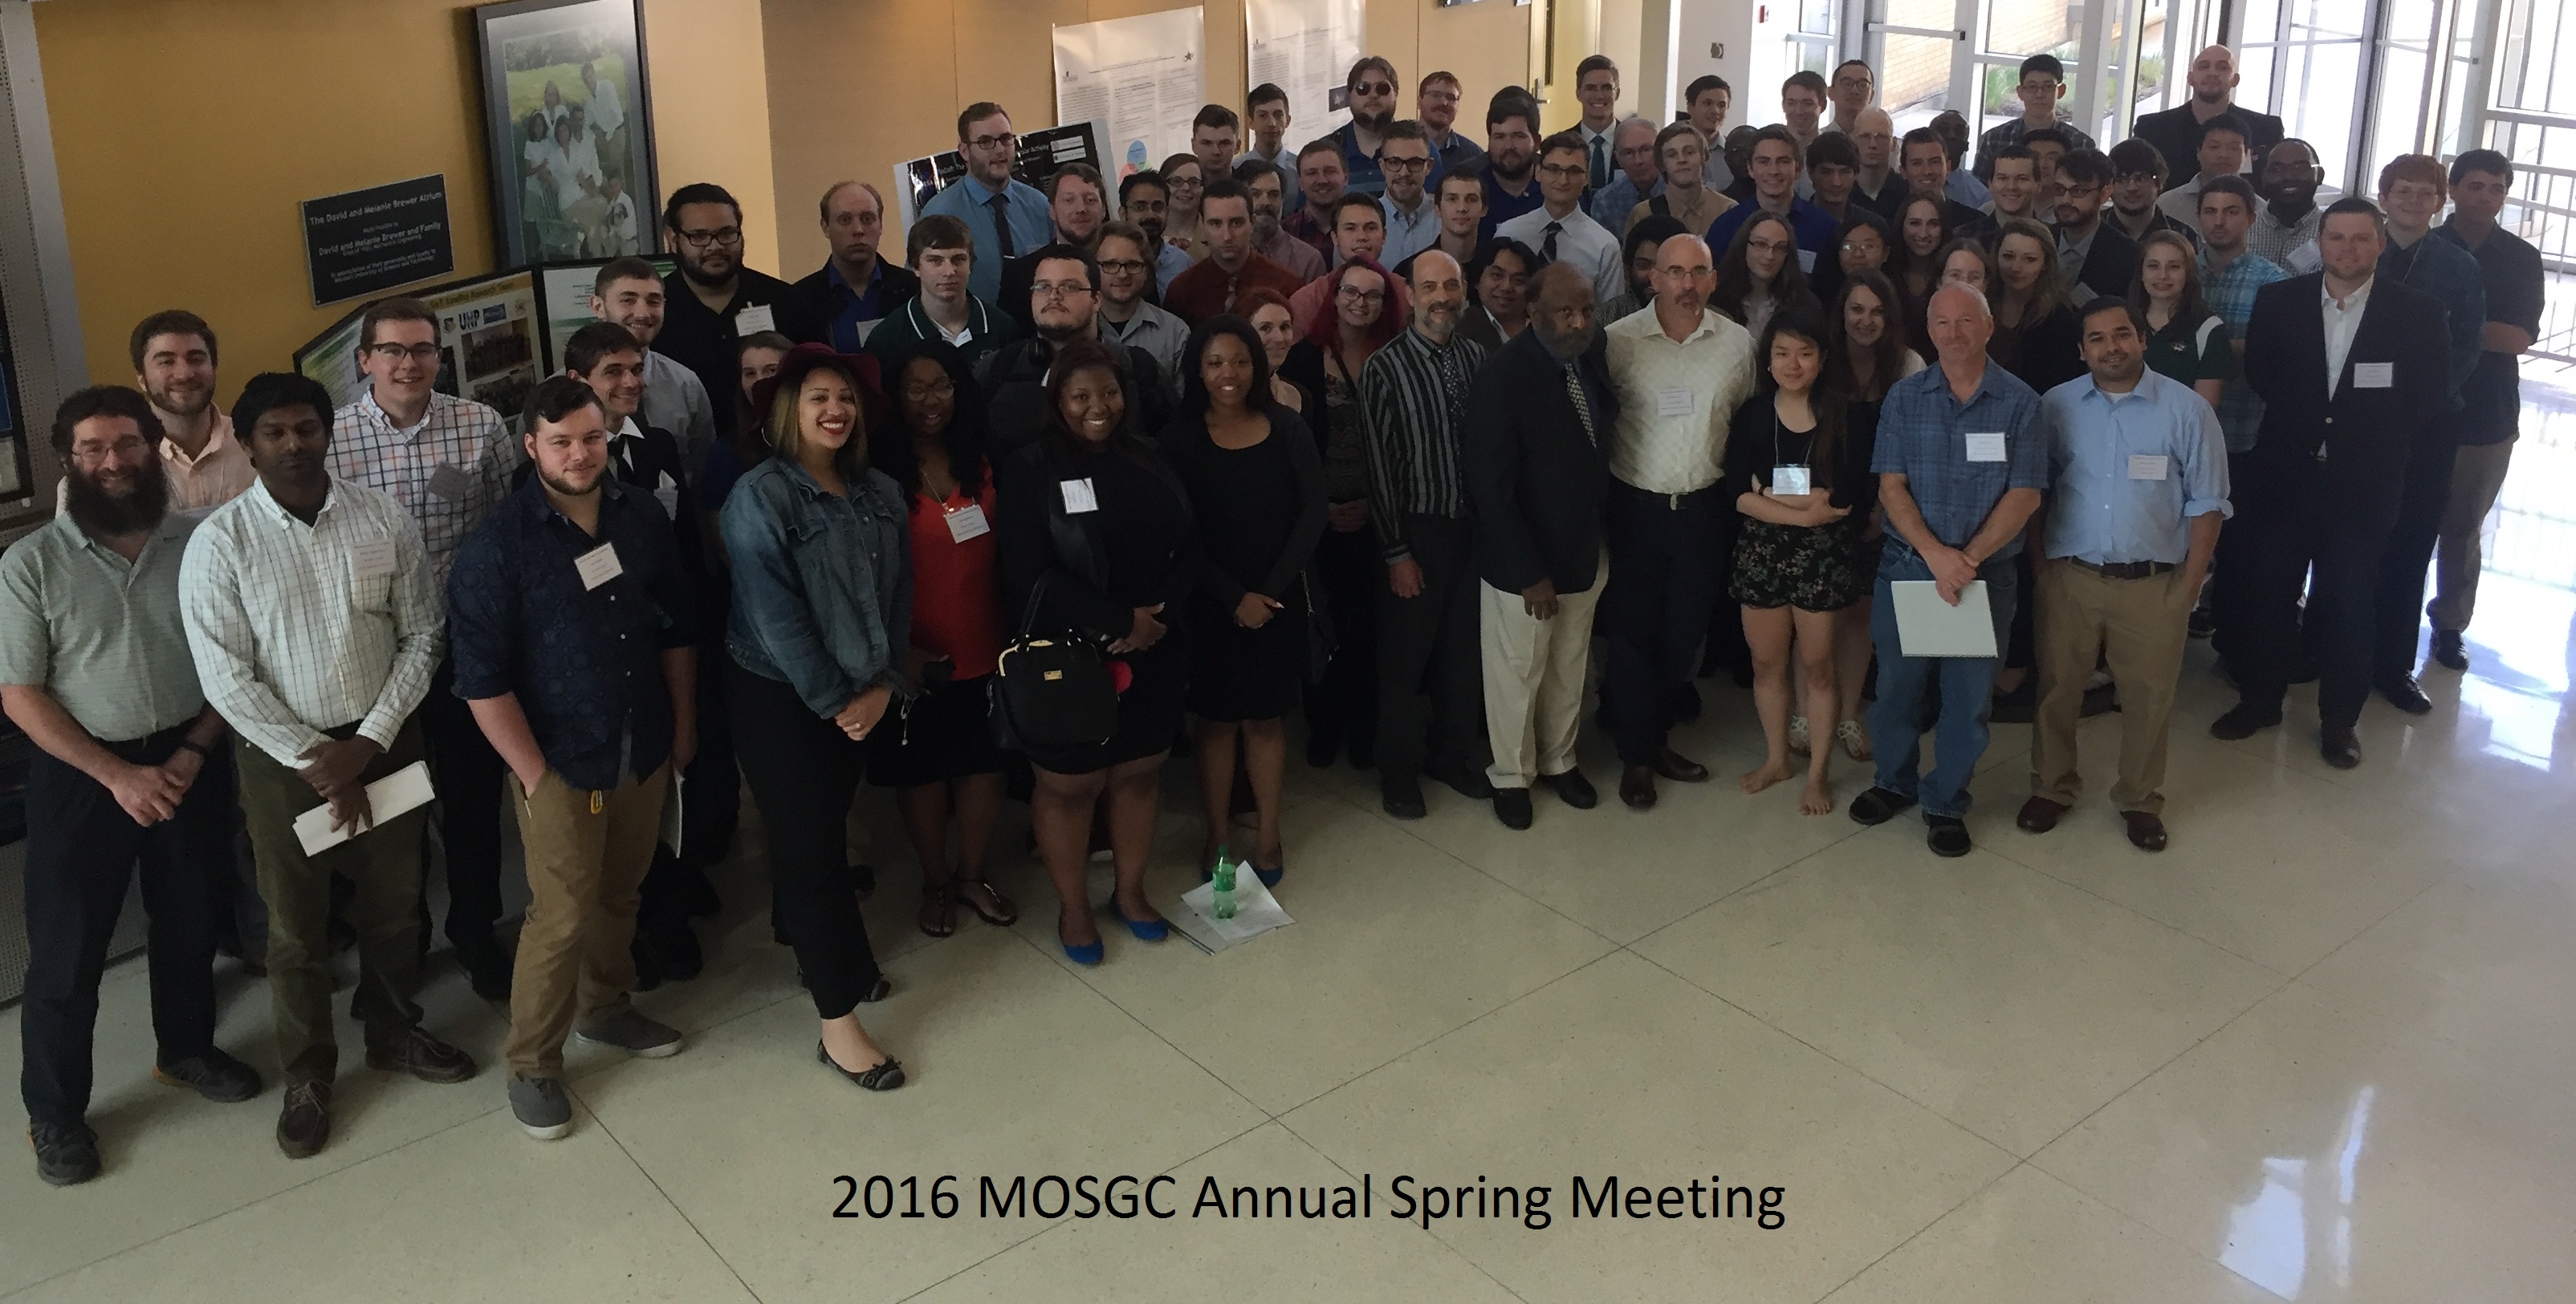 Group Photo of the 2016 MOSGC Annual Spring Meeting